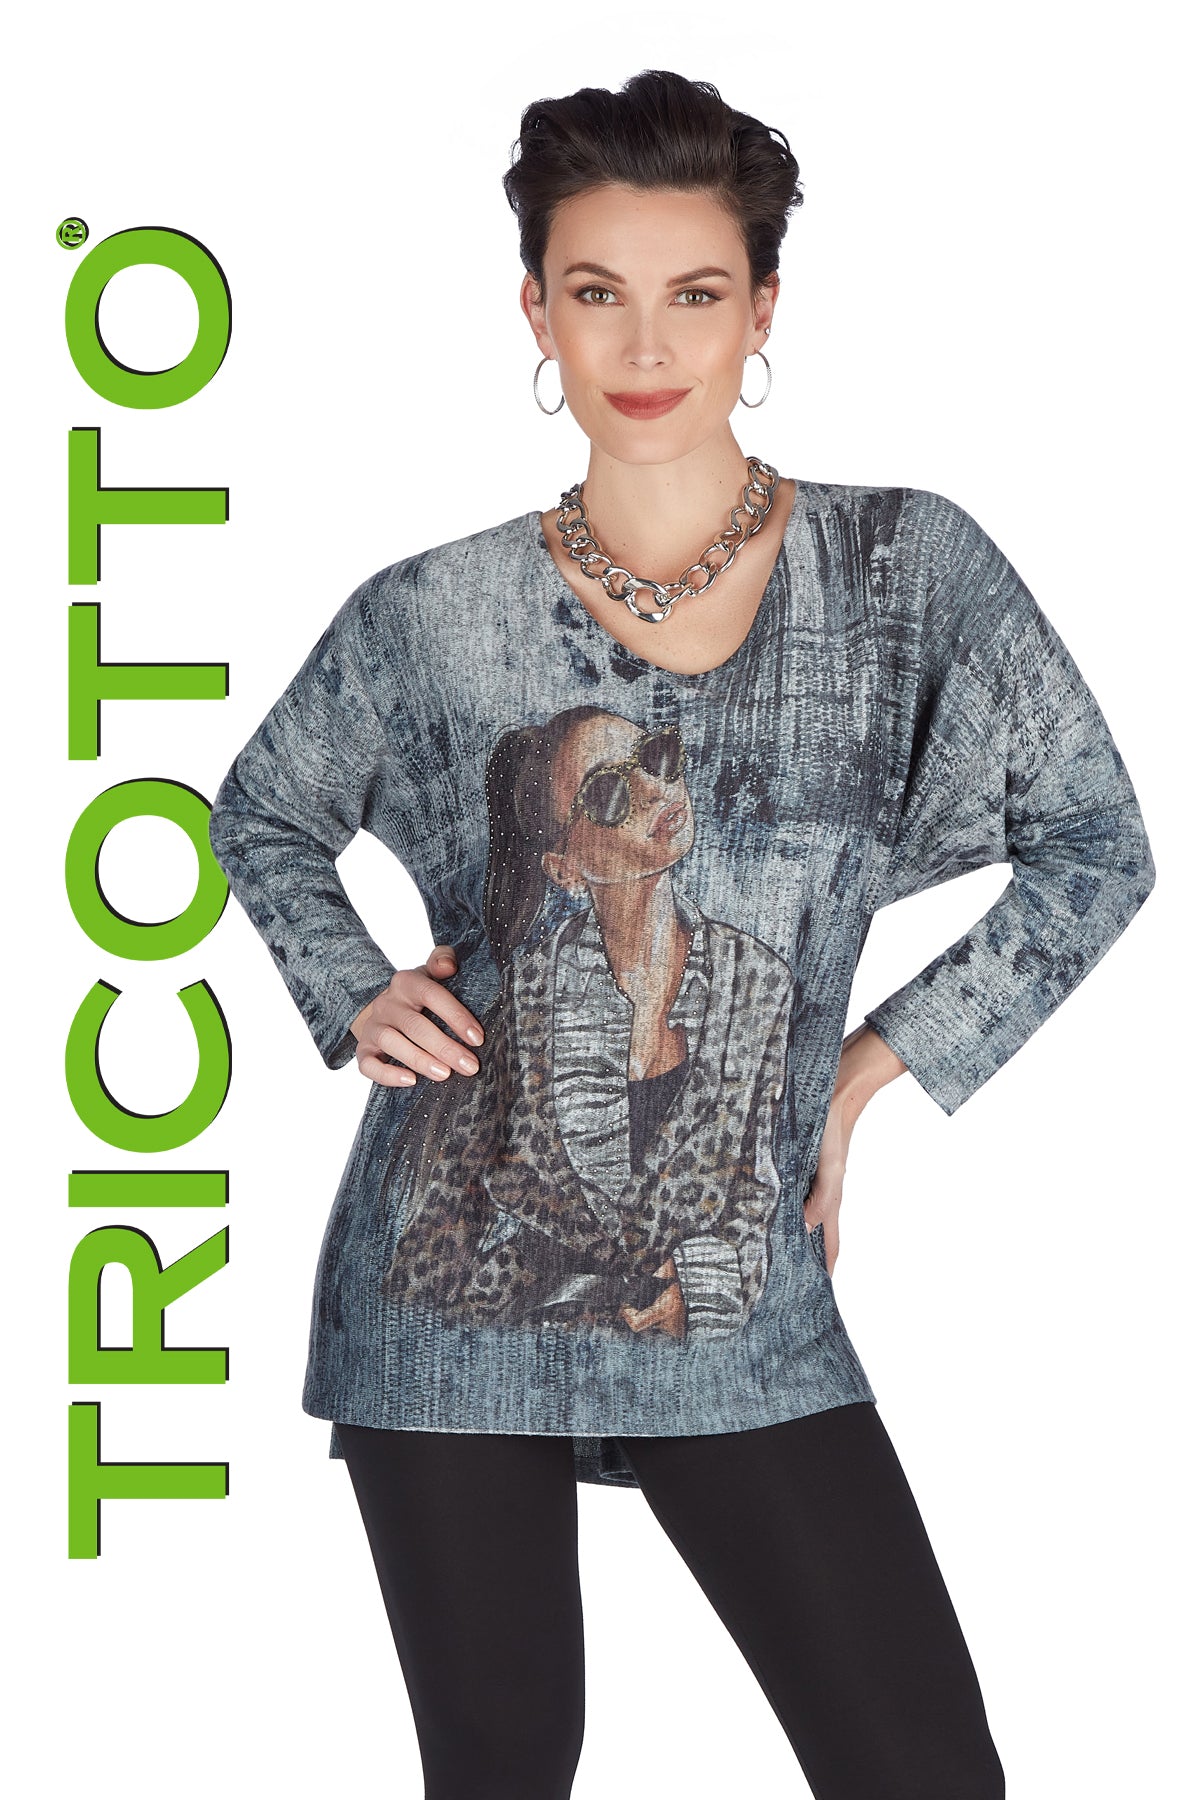 Tricotto Sweaters-Buy Tricotto Sweaters Online-Women's Fashion Sweaters-Tricotto Clothing Montreal-Tricotto Online Shop